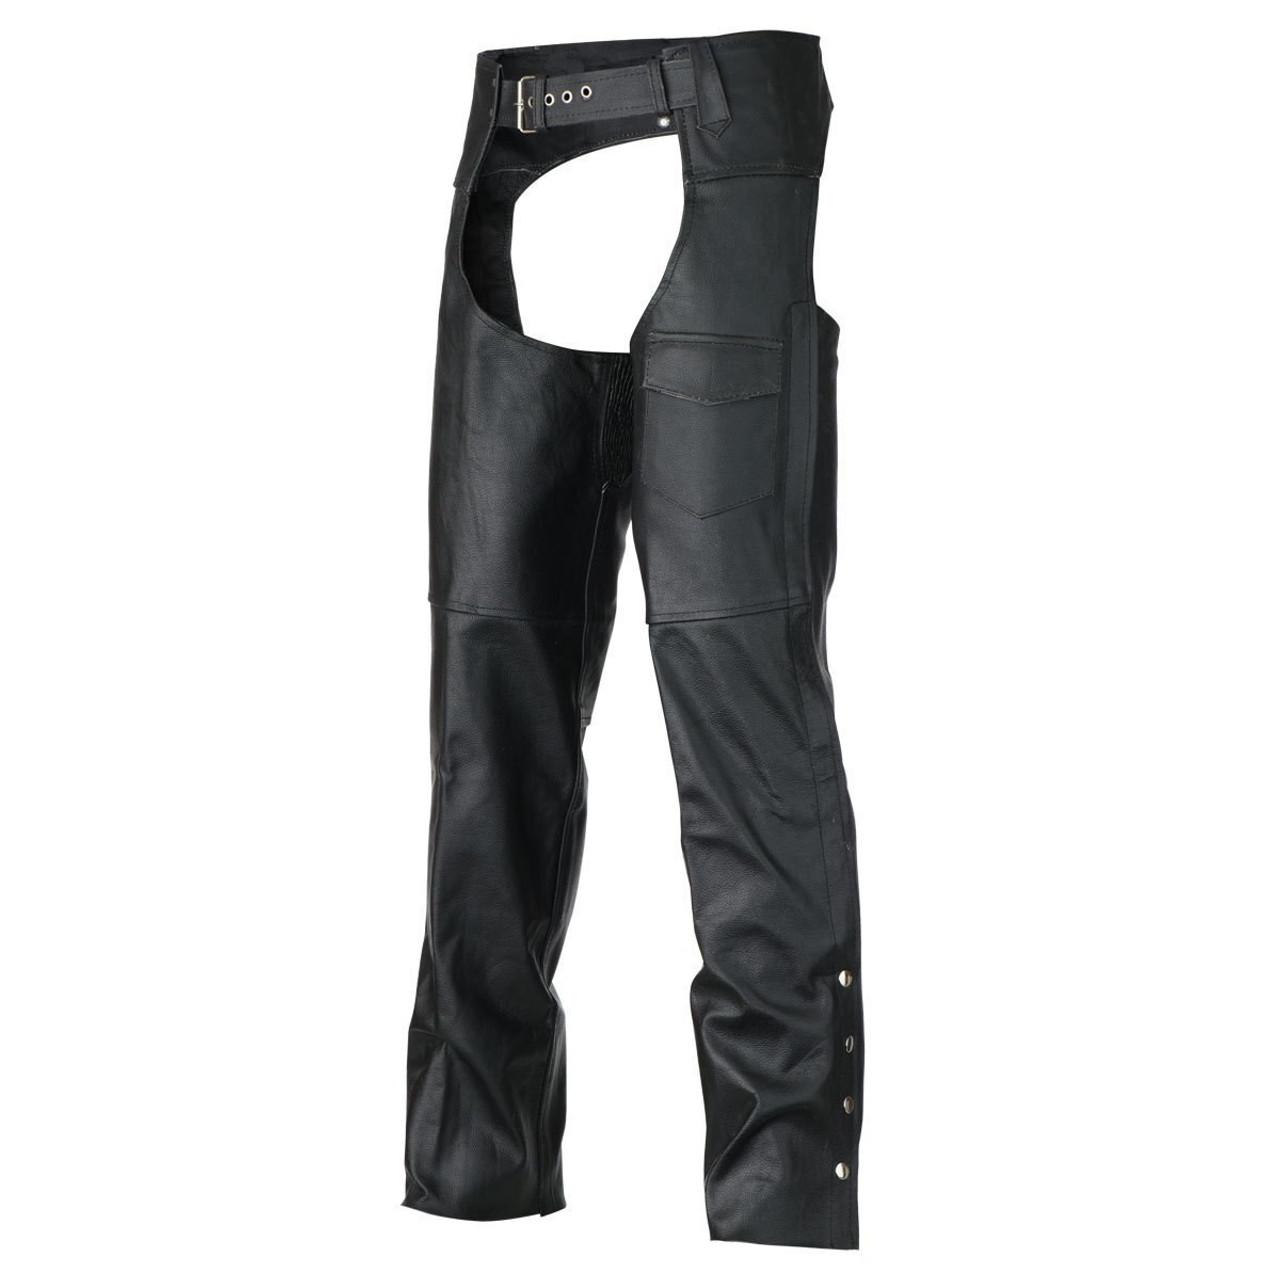 Black Leather Bike Riding Chaps - Team Motorcycle